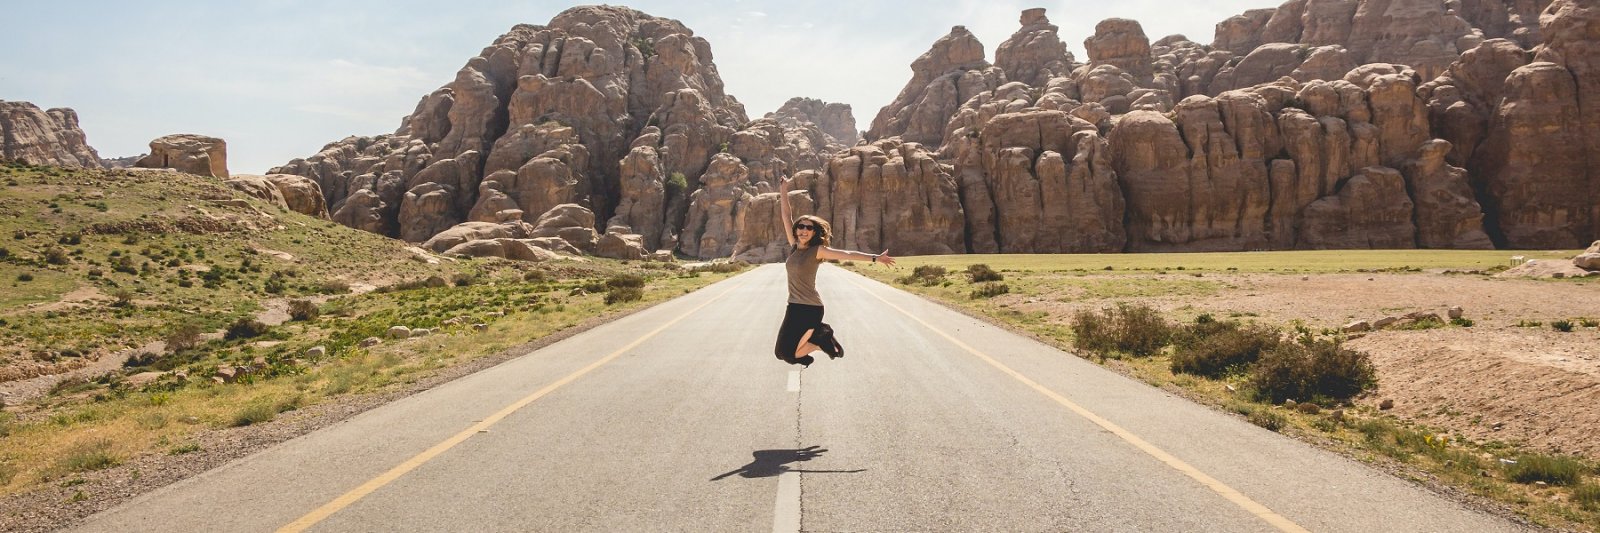 woman jumping in road